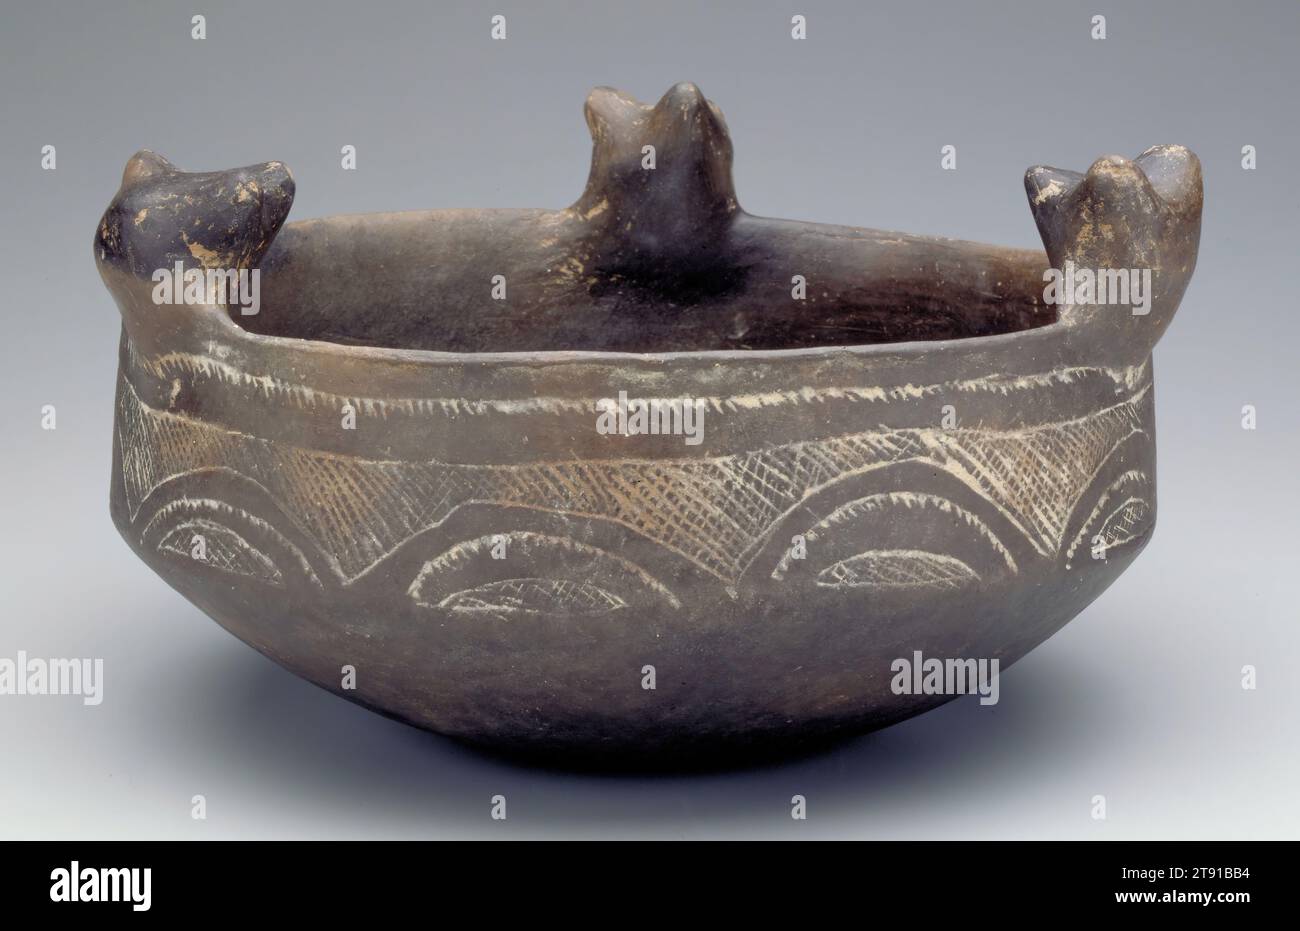 Bowl, 1250-1499, 4 x 9 1/2 in. (10.16 x 24.13 cm), Ceramic, United States, 13th-15th century, Bears have long been seen among many Native cultures as beings with unusual powers. They reappear each spring after a long hibernation, so are associated with renewal and healing. Their strength and ferocity, combined with their many physical similarities to humans, made them frequently emulated by hunters and warriors. Bears often served as clan animals linking an entire extended family group. The ones depicted on this bowl could have been meant to evoke any of these meanings Stock Photo